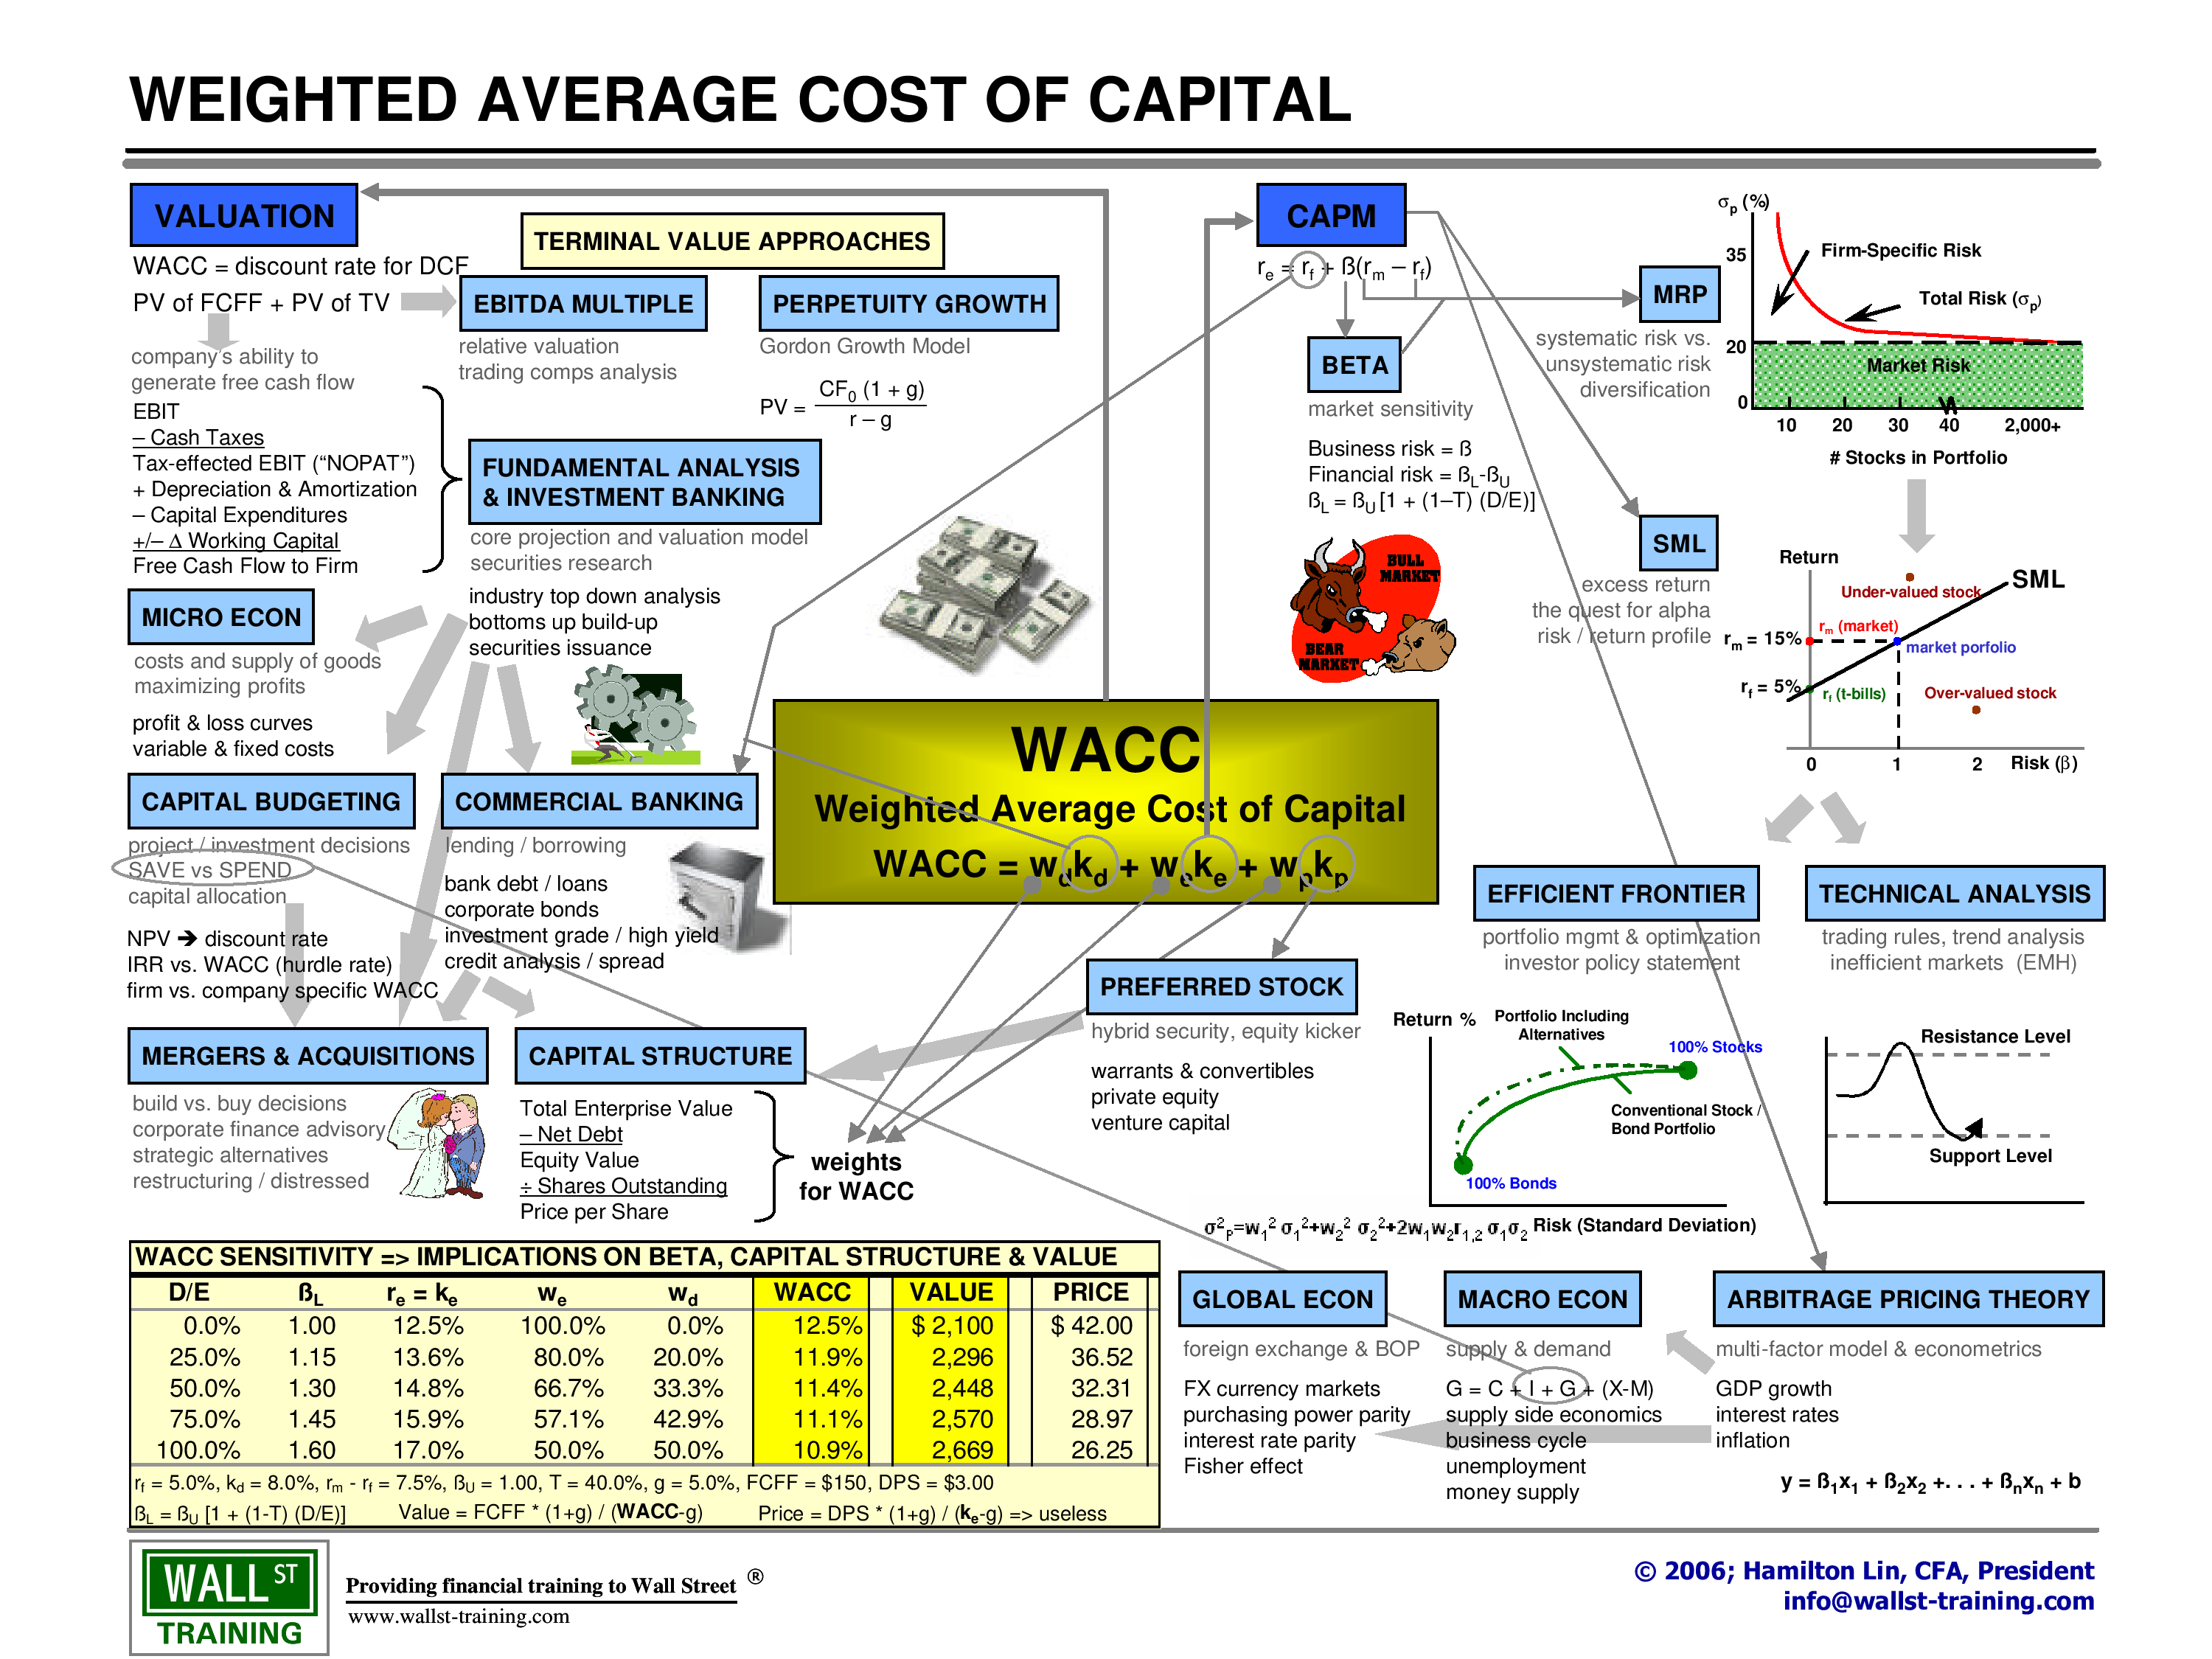 Weighted Average Cost of Capital (WACC) - Financial Edge